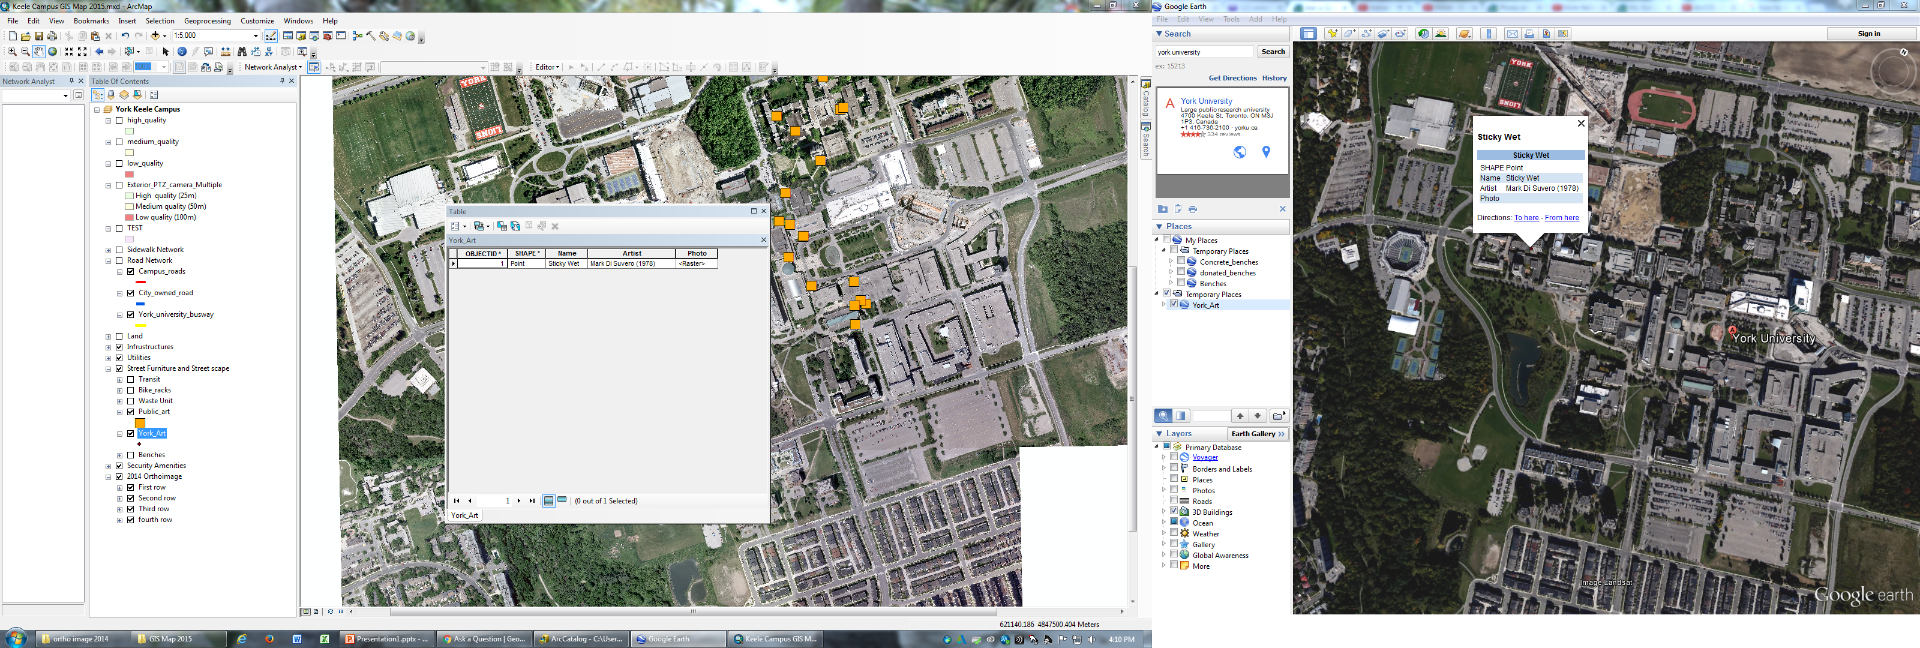 how to view a feature with a photo attached to it ... - Esri Community